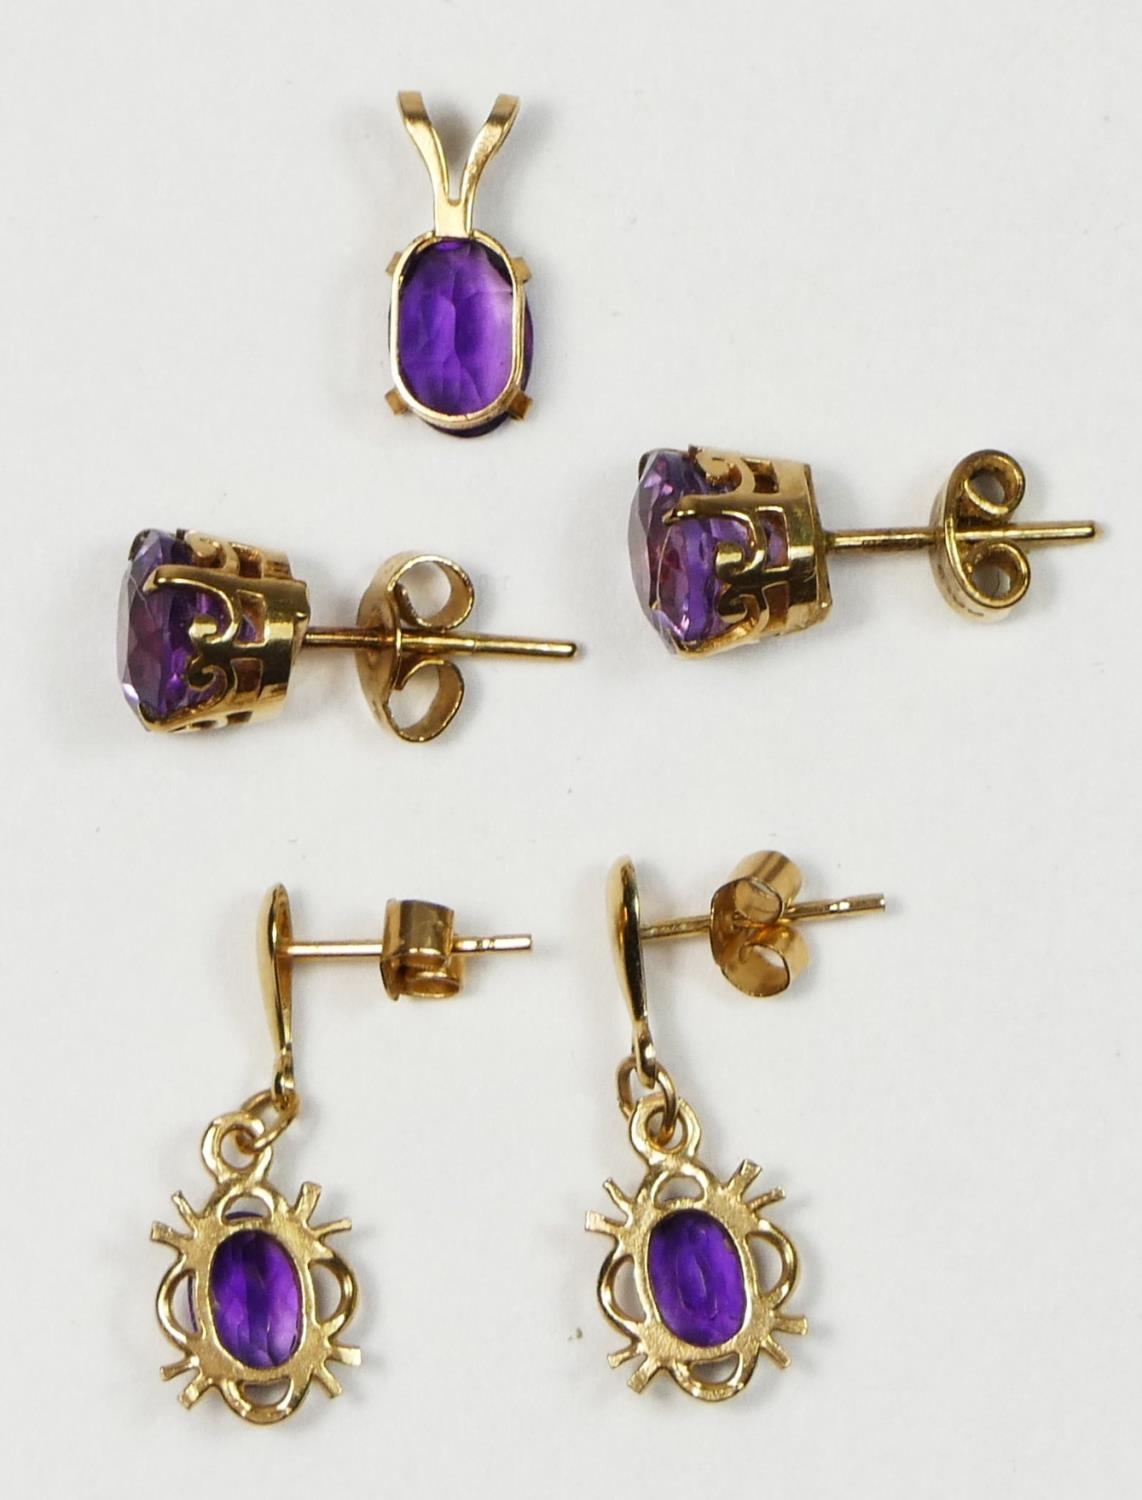 Two pairs of 9ct gold mounted amethyst ear rings and a matching pendant, 3gm - Image 2 of 2